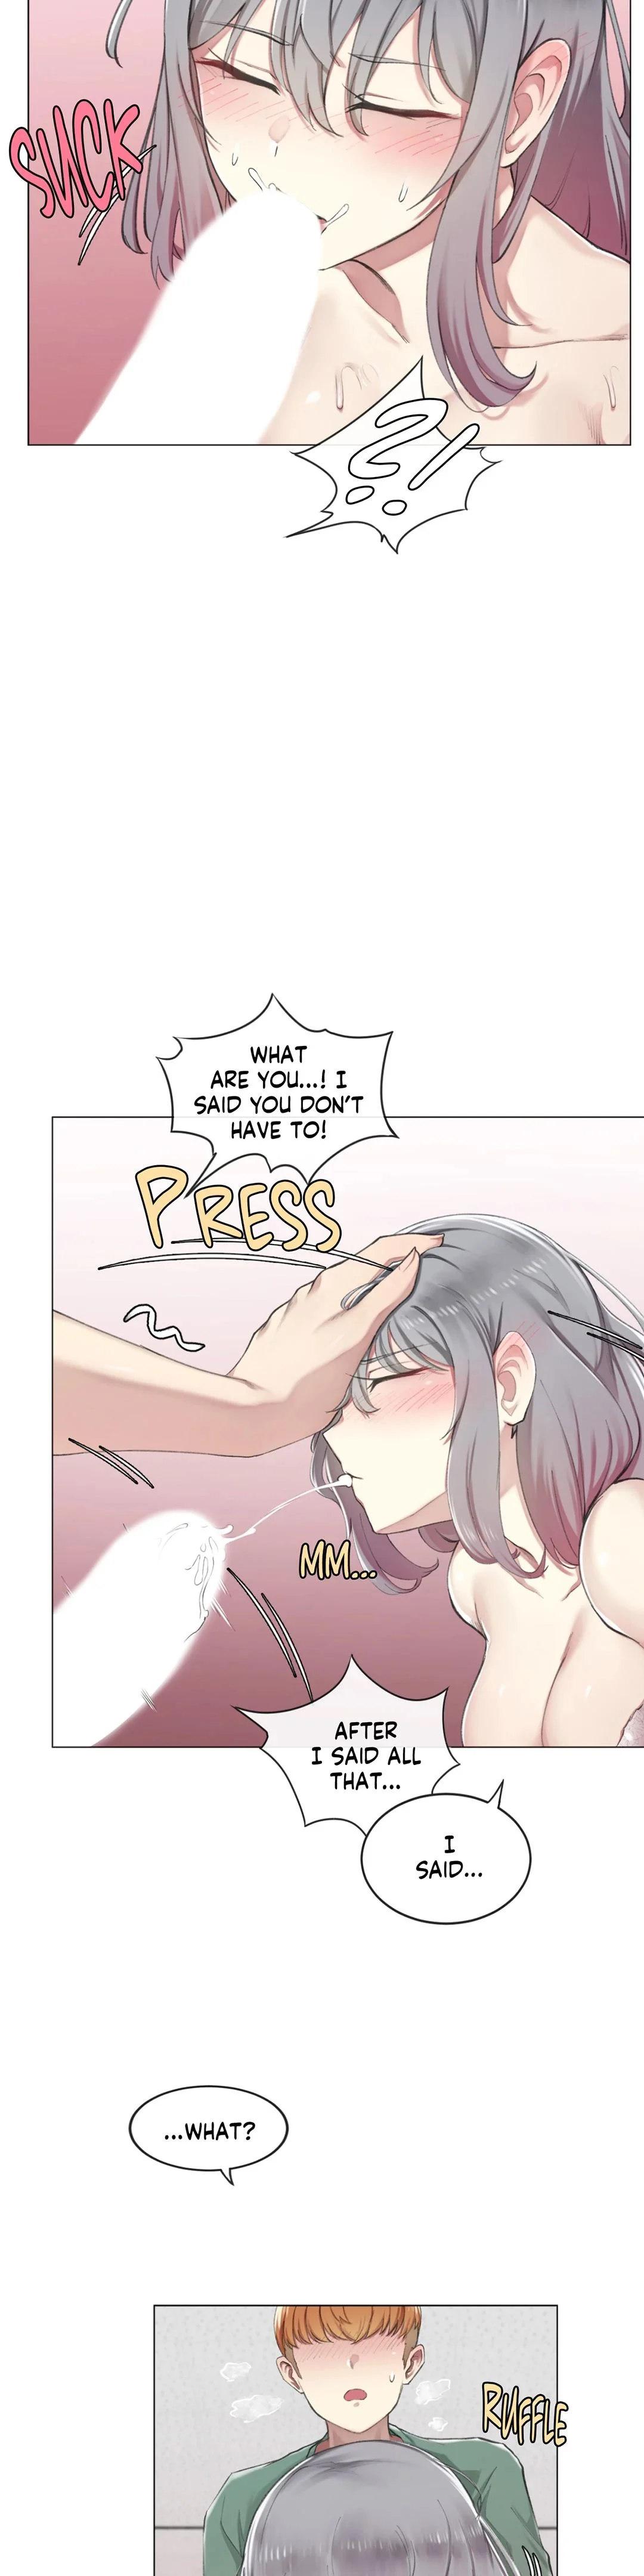 [Dumangoon, KONG_] Sexcape Room: Snap Off Ch.7/7 [English] [Manhwa PDF] Completed 59